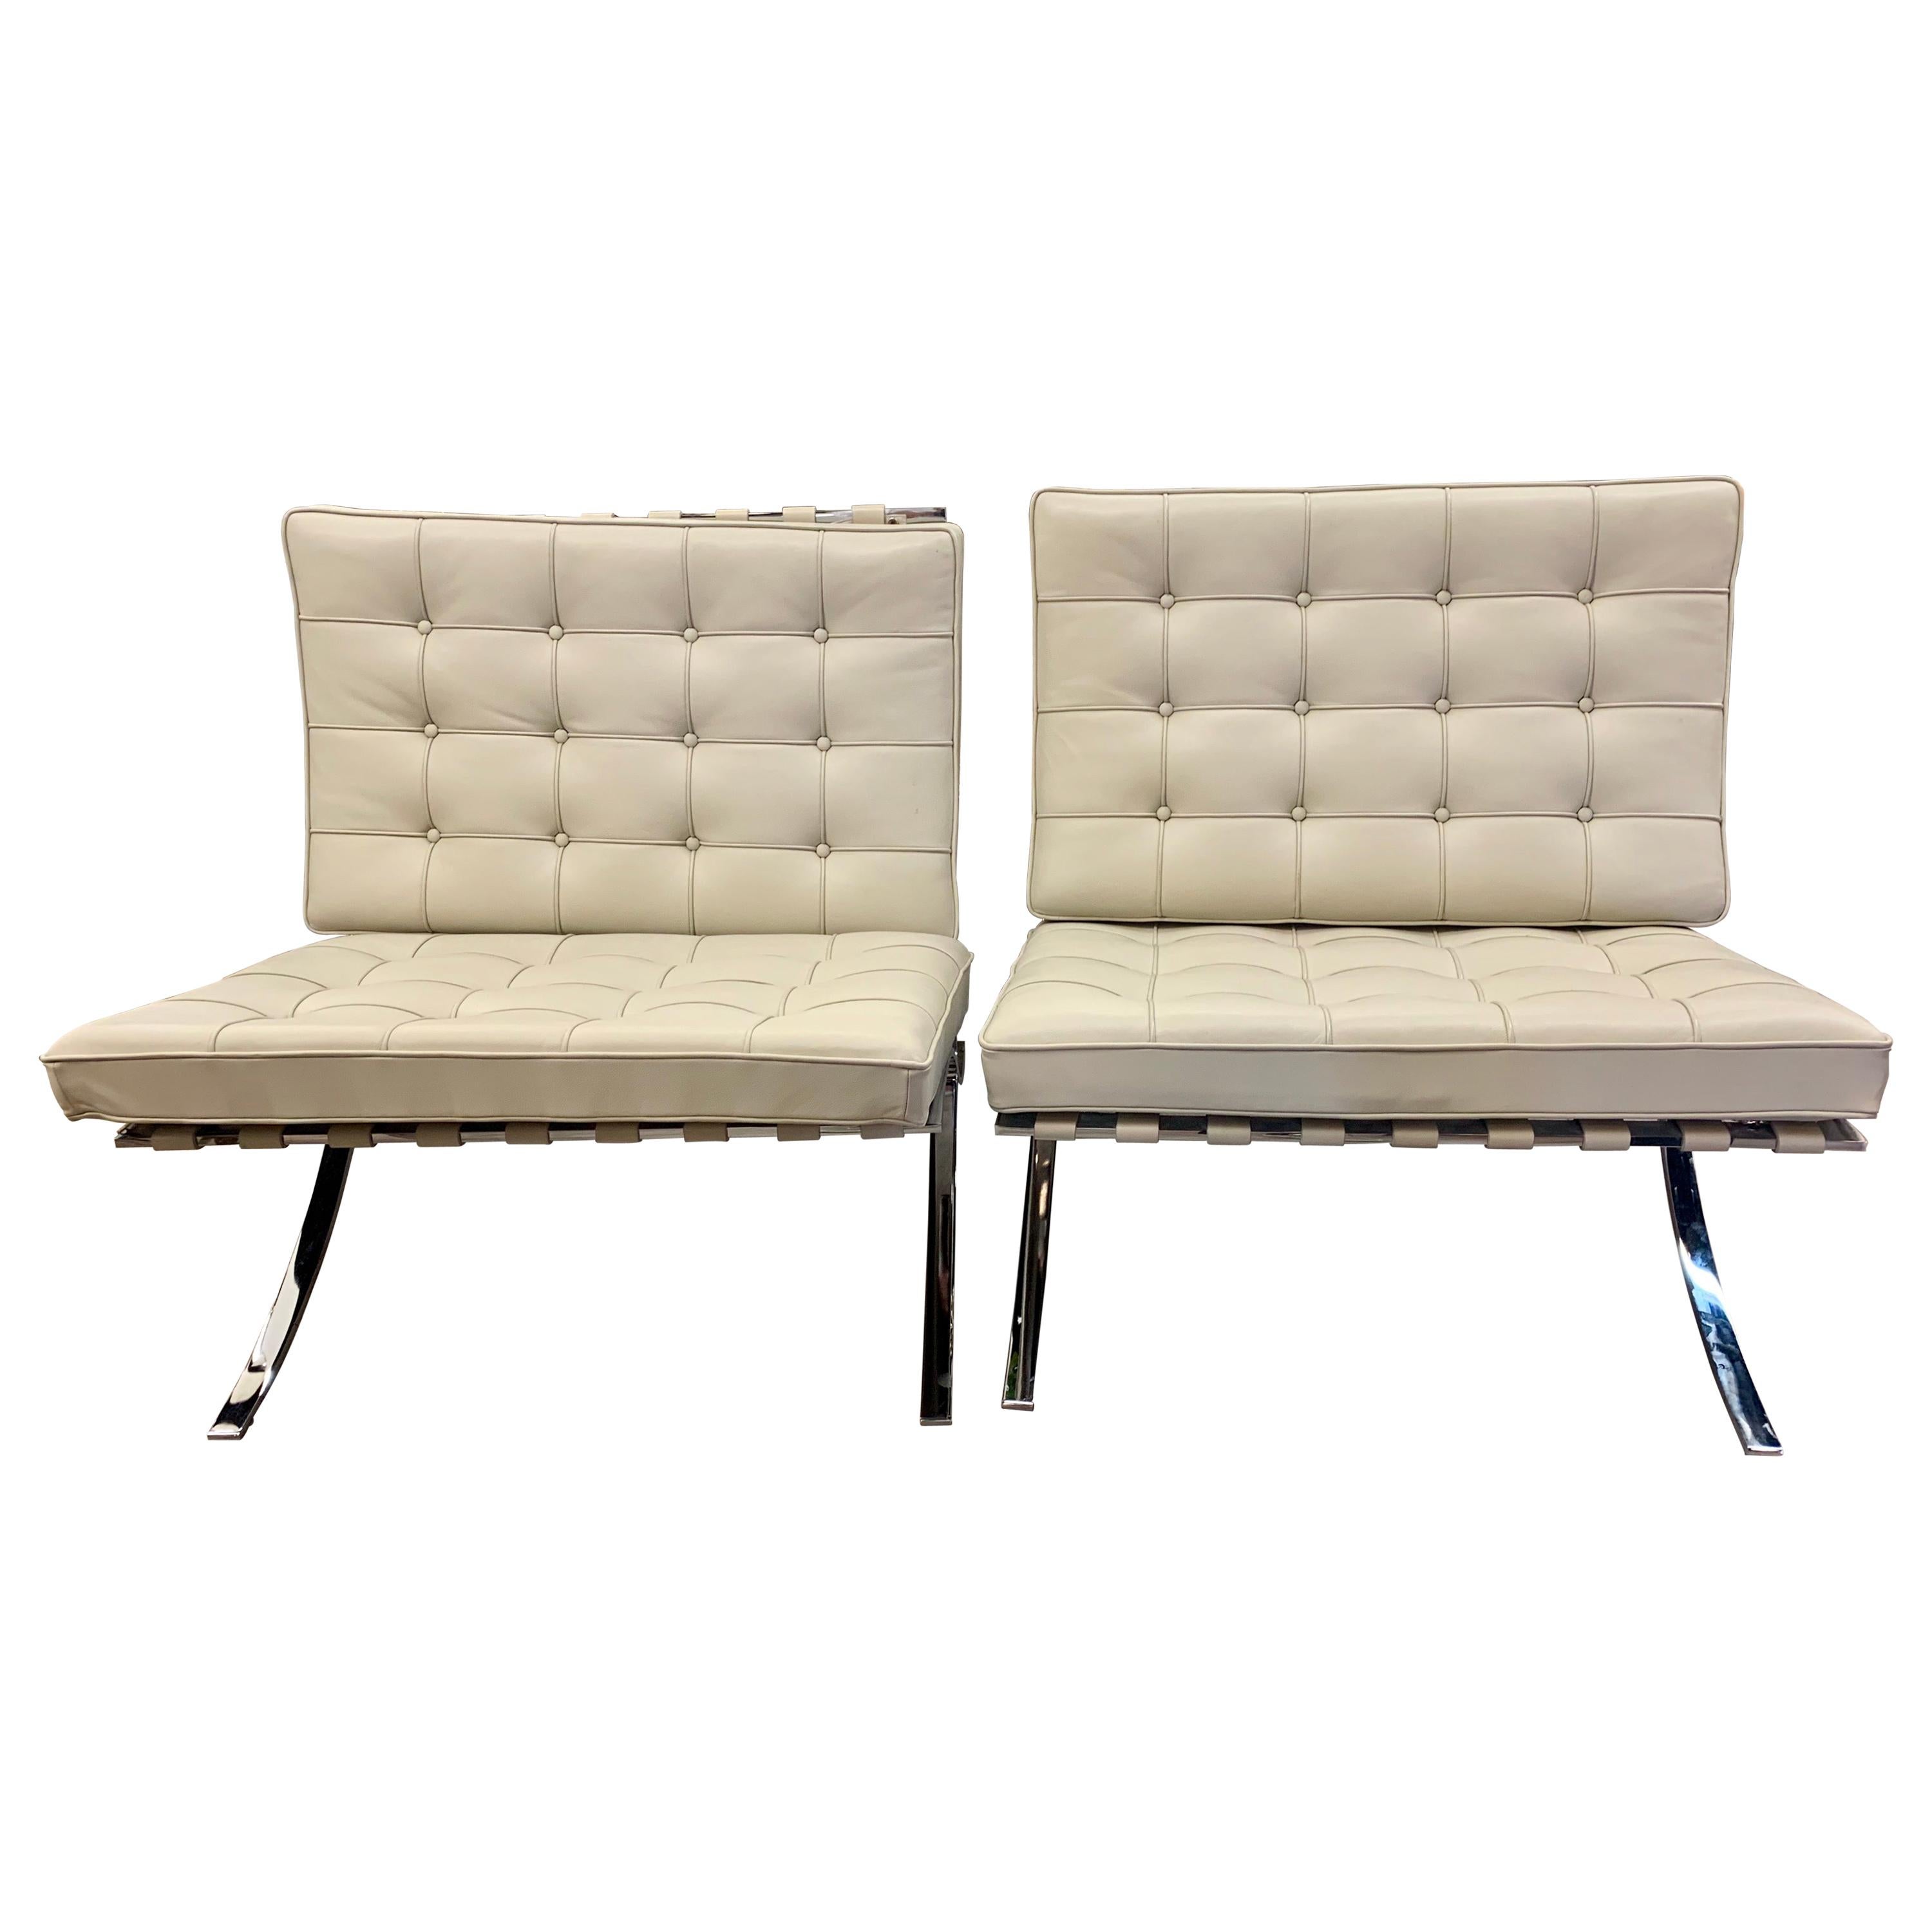 Pair of Signed Knoll Leather Barcelona Chairs by Mies van der Rohe